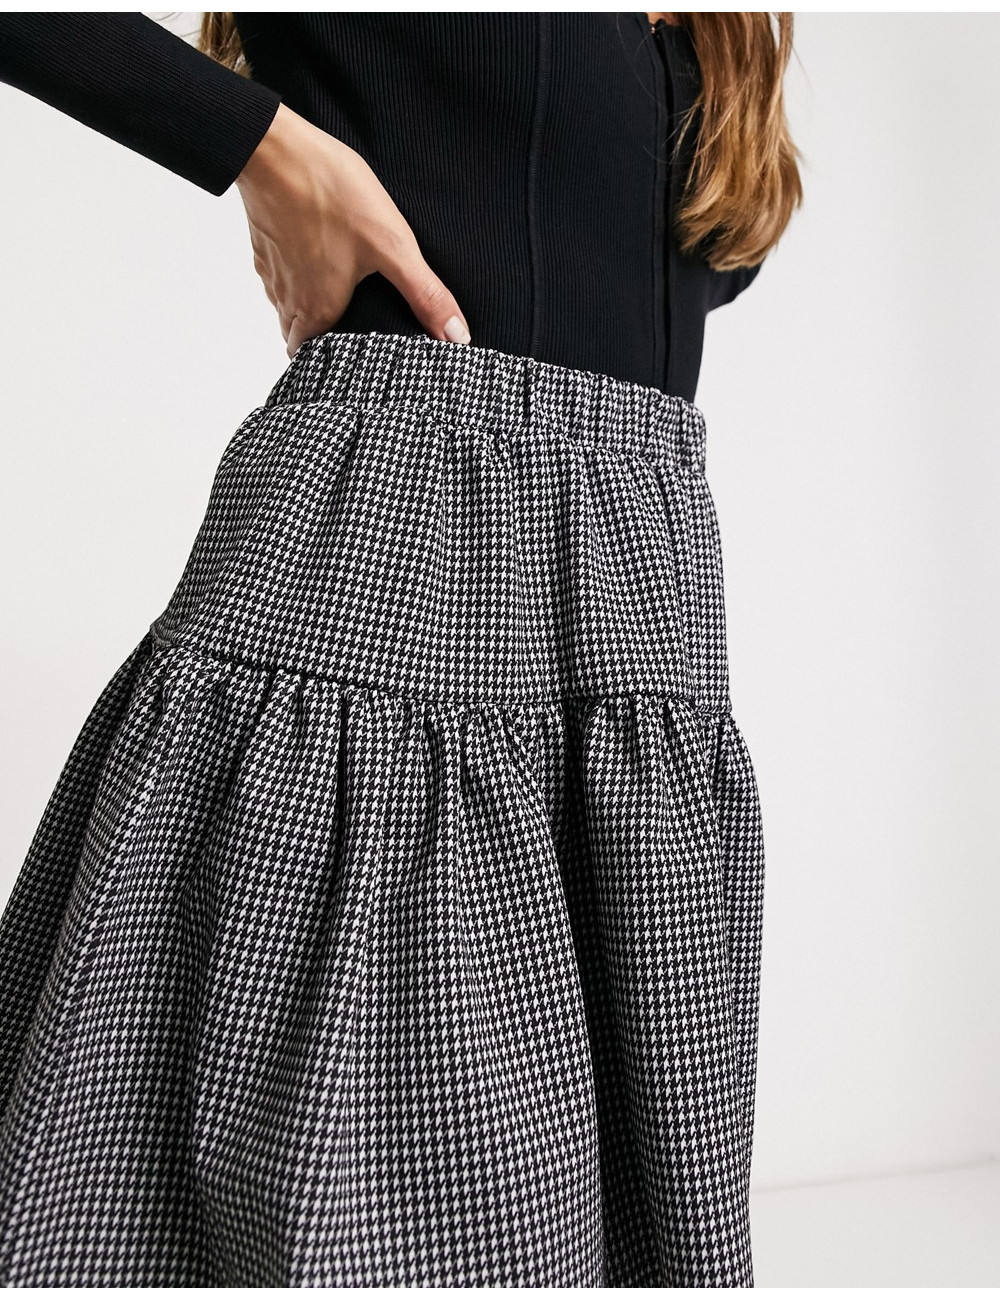 Y.A.S mini skirt co-ord...